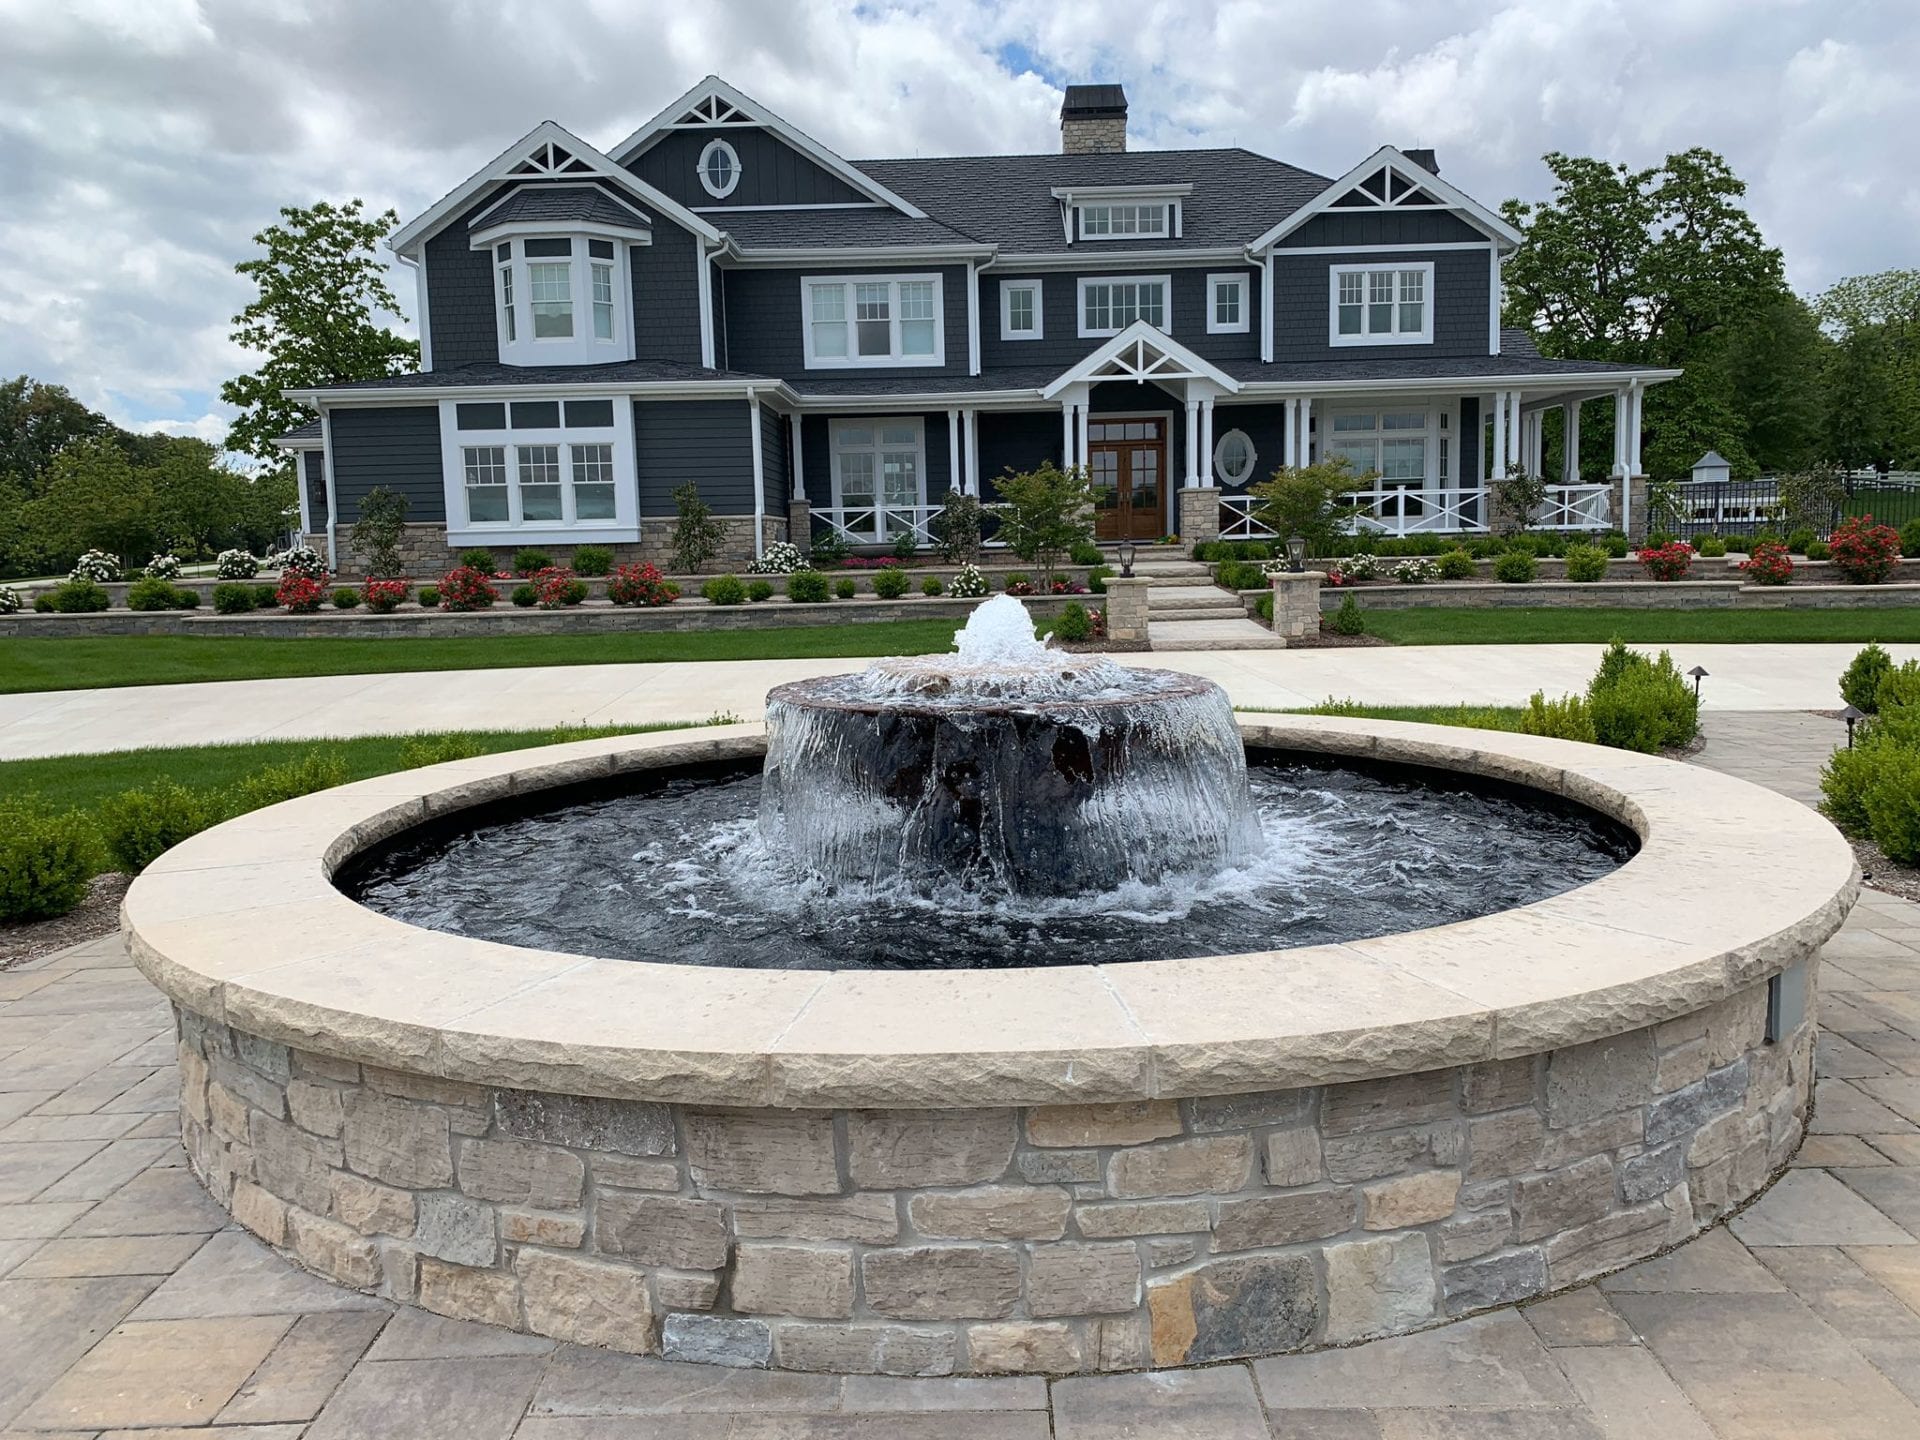 Water fountain with complete front landscape